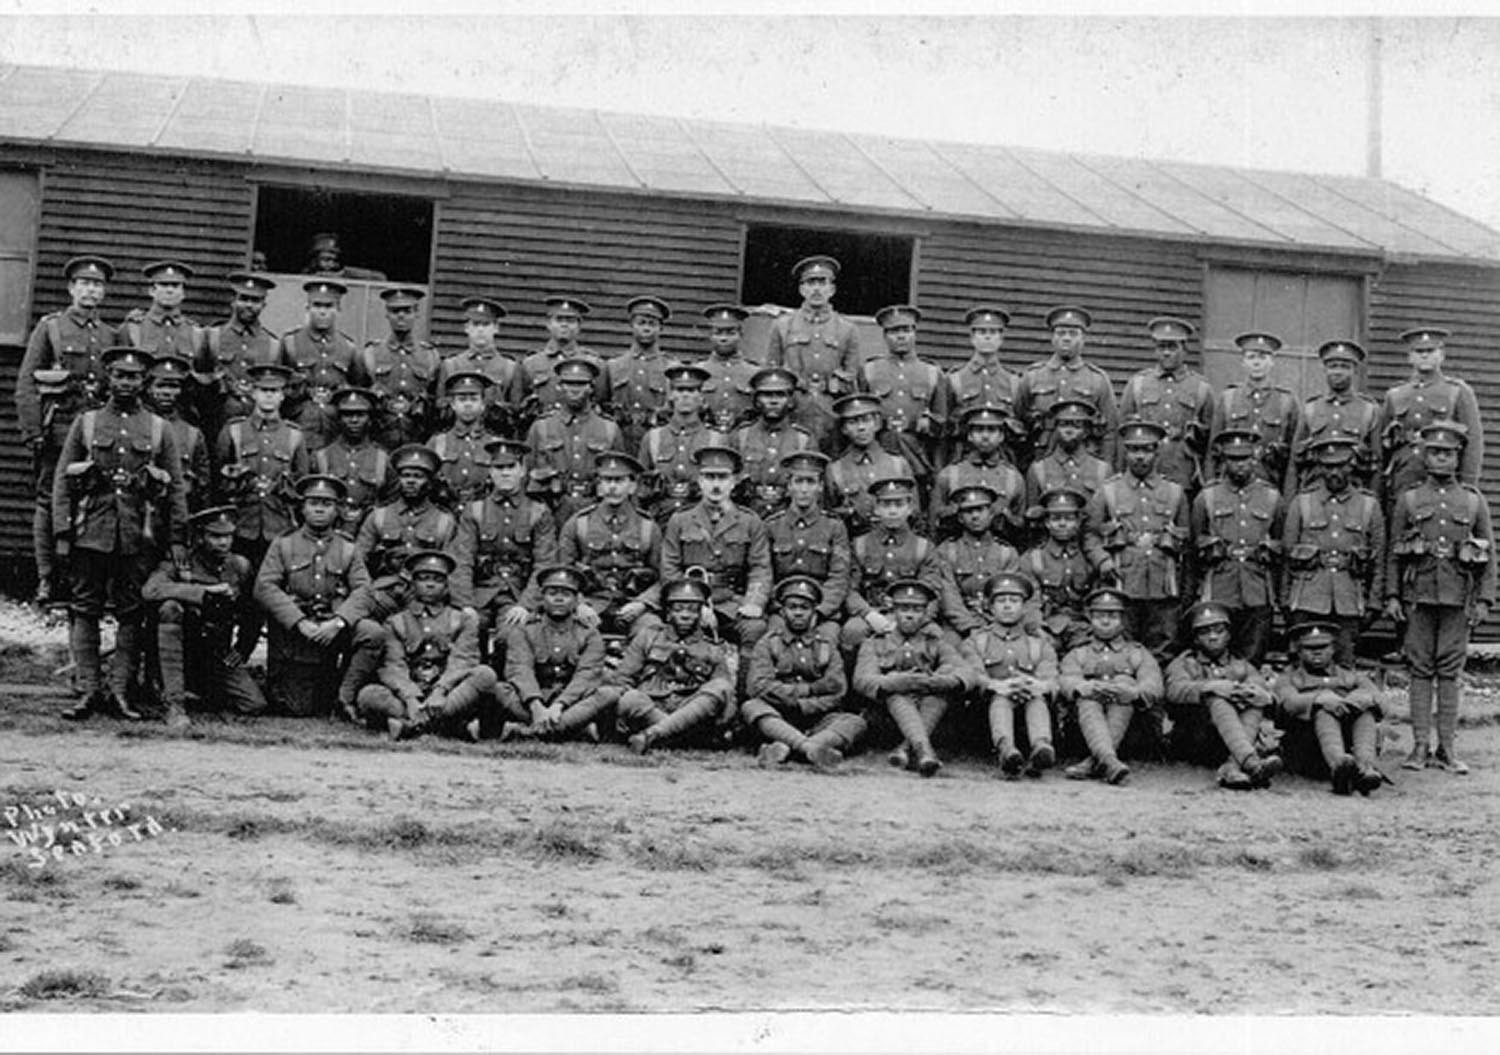 Black and white photograph showing four rows of troops arranged for the picture in front of their barracks